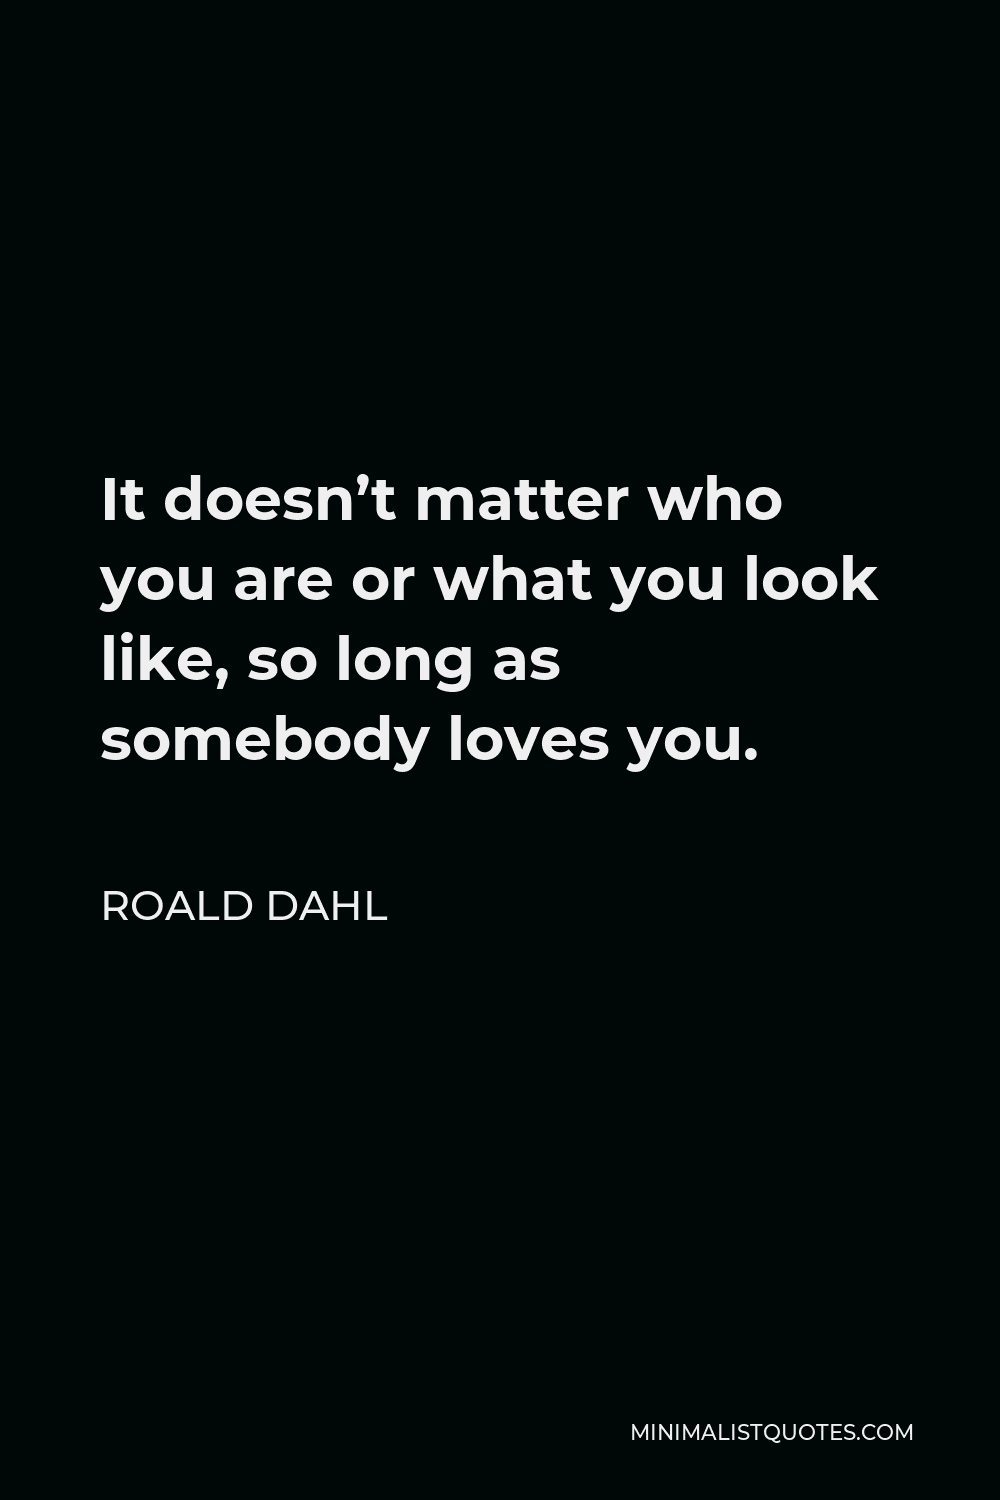 Roald Dahl Quote - It doesn’t matter who you are or what you look like, so long as somebody loves you.